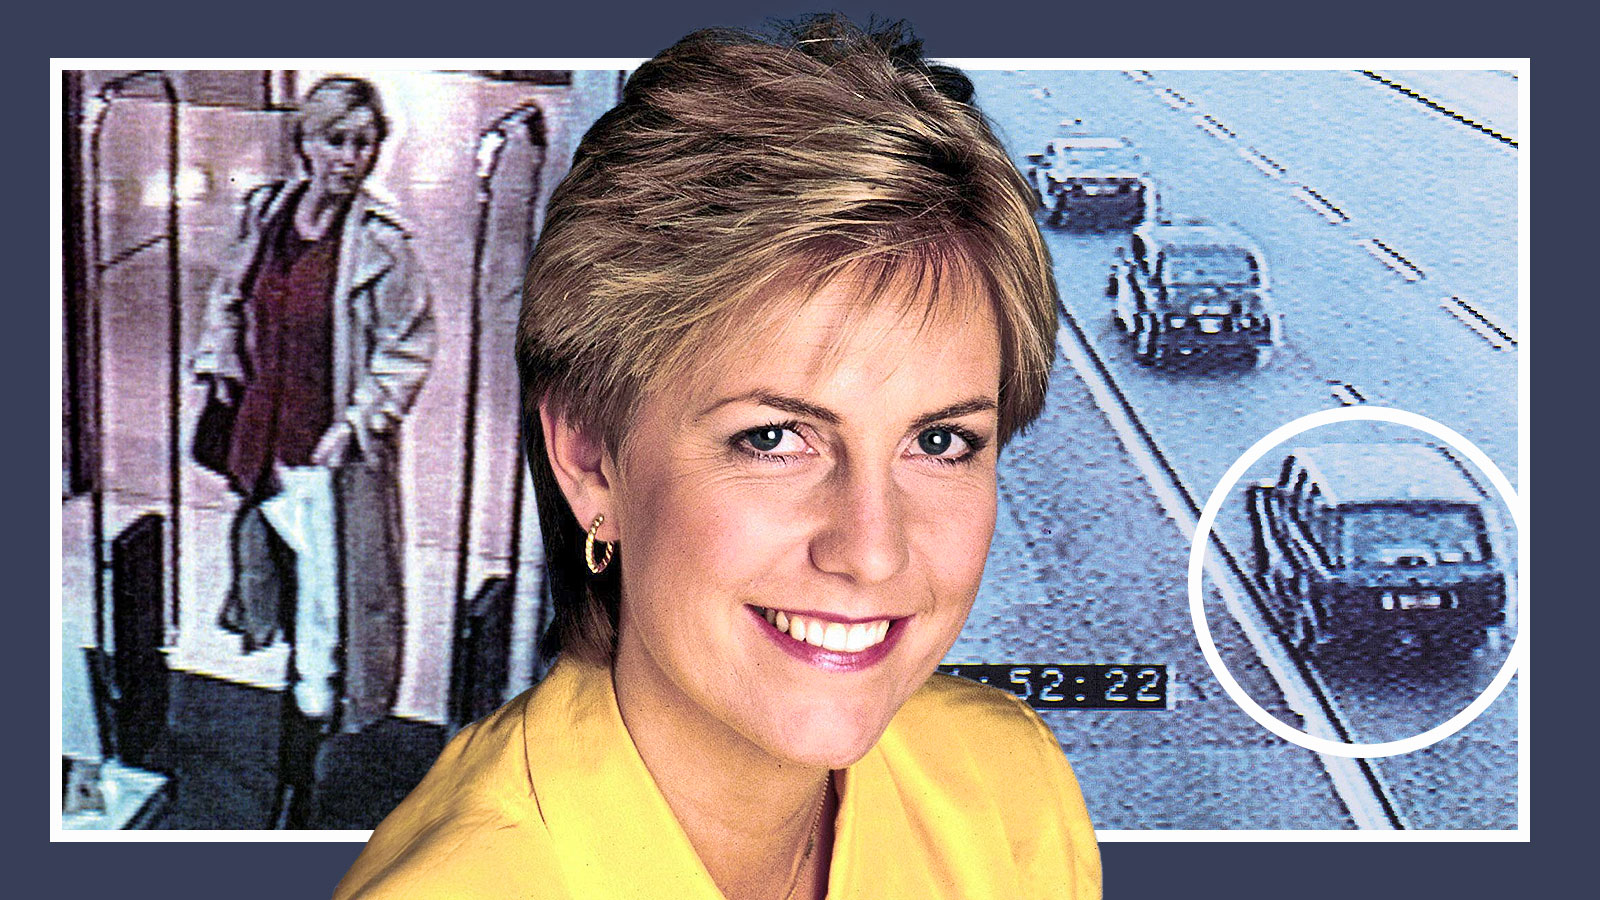 Police have come no closer to formally identifying further suspects in the murder of Jill Dando in 1999